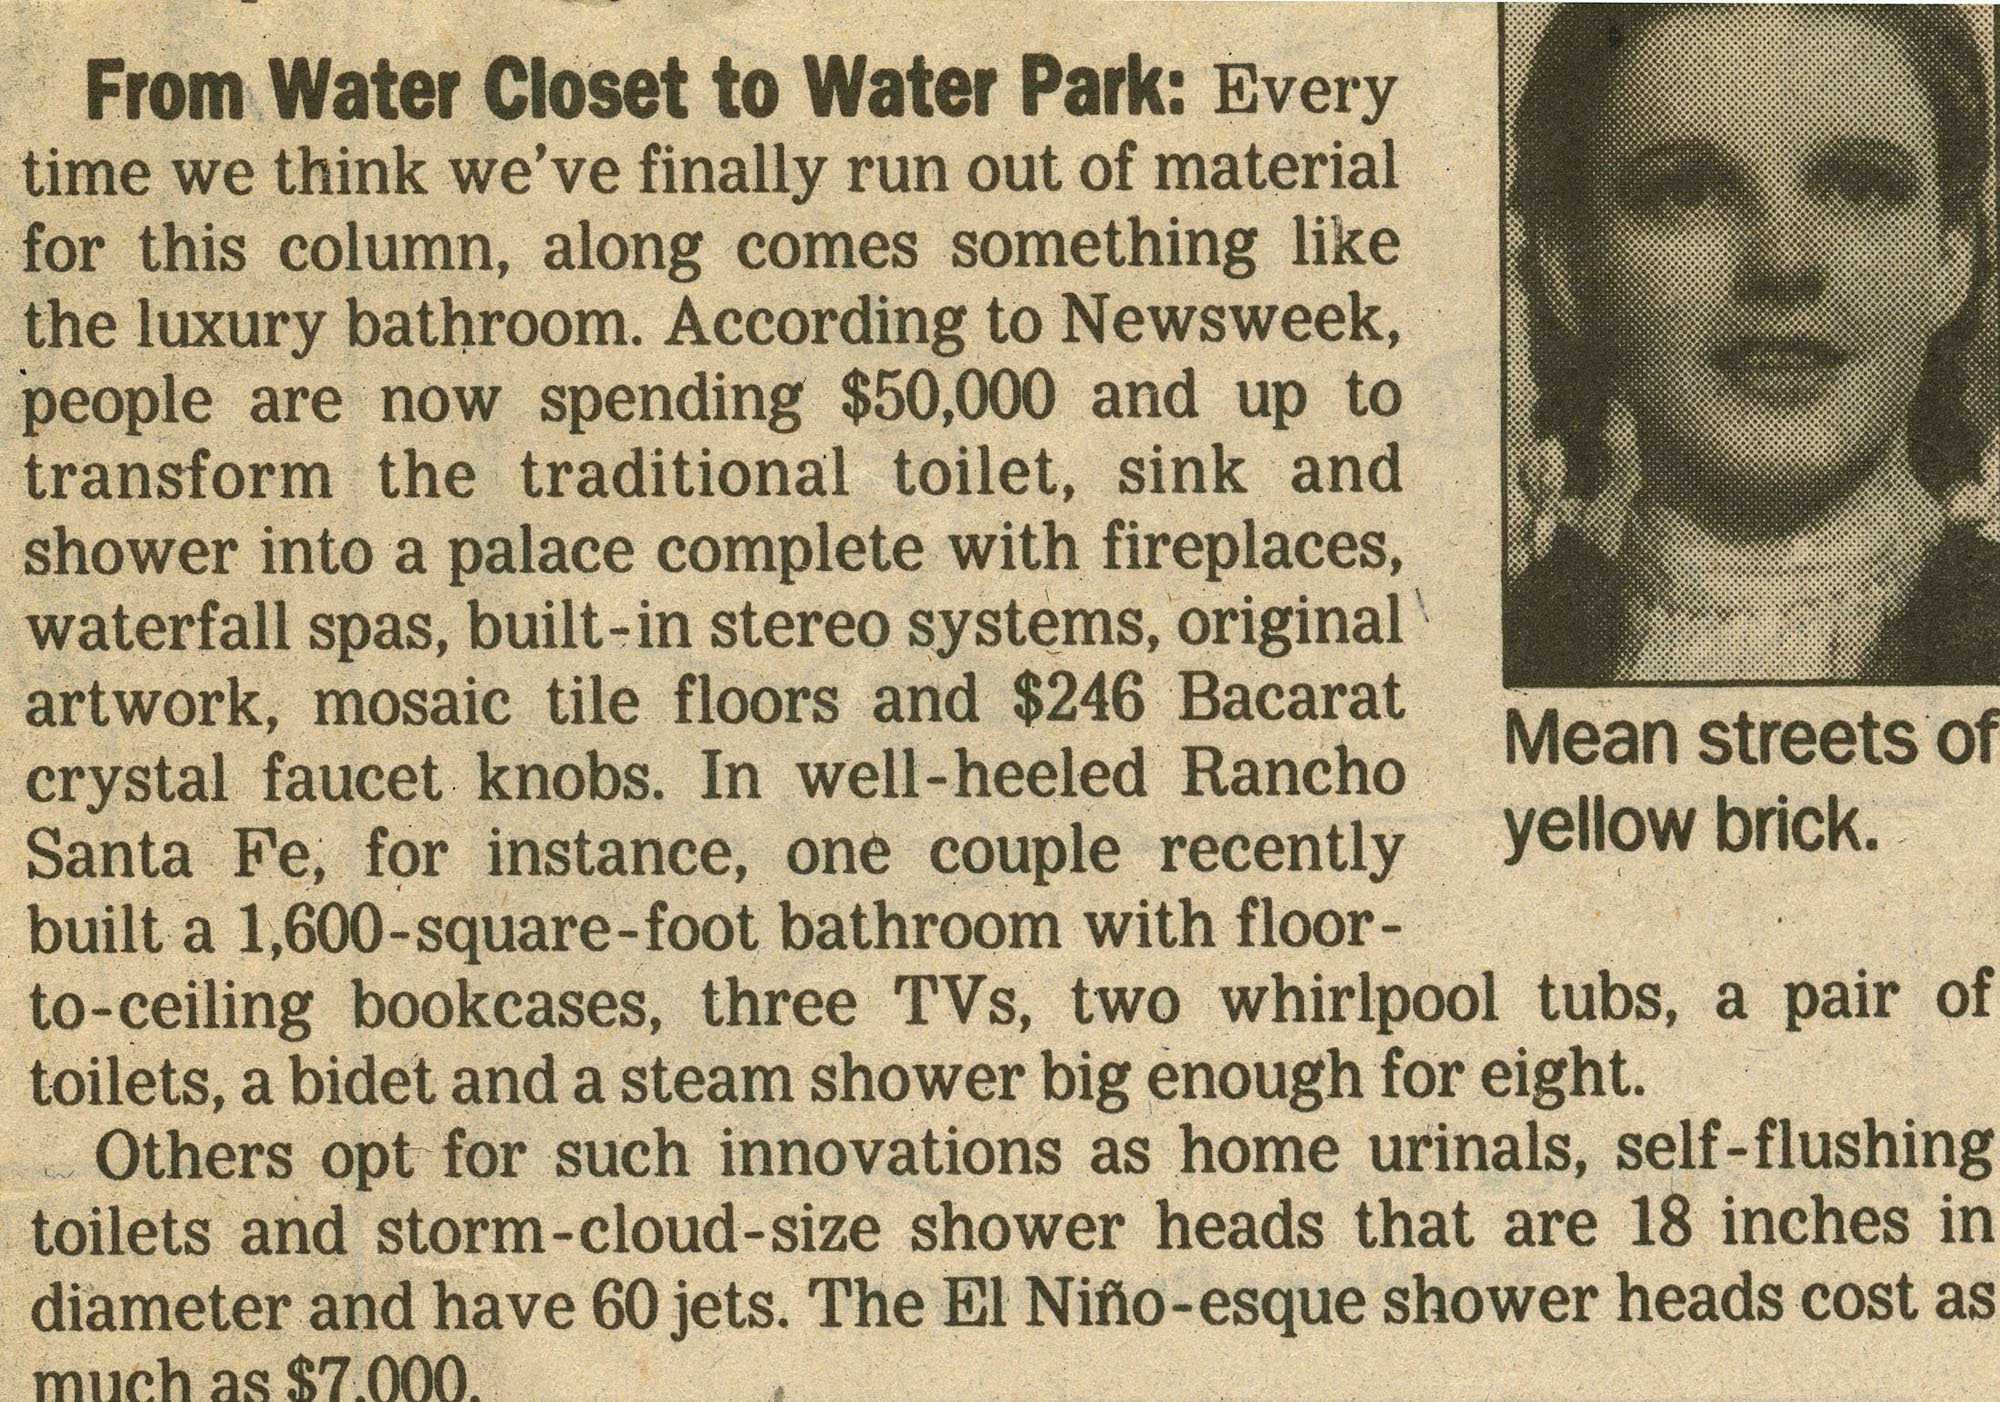 june1998- From Water Closet to Water Park